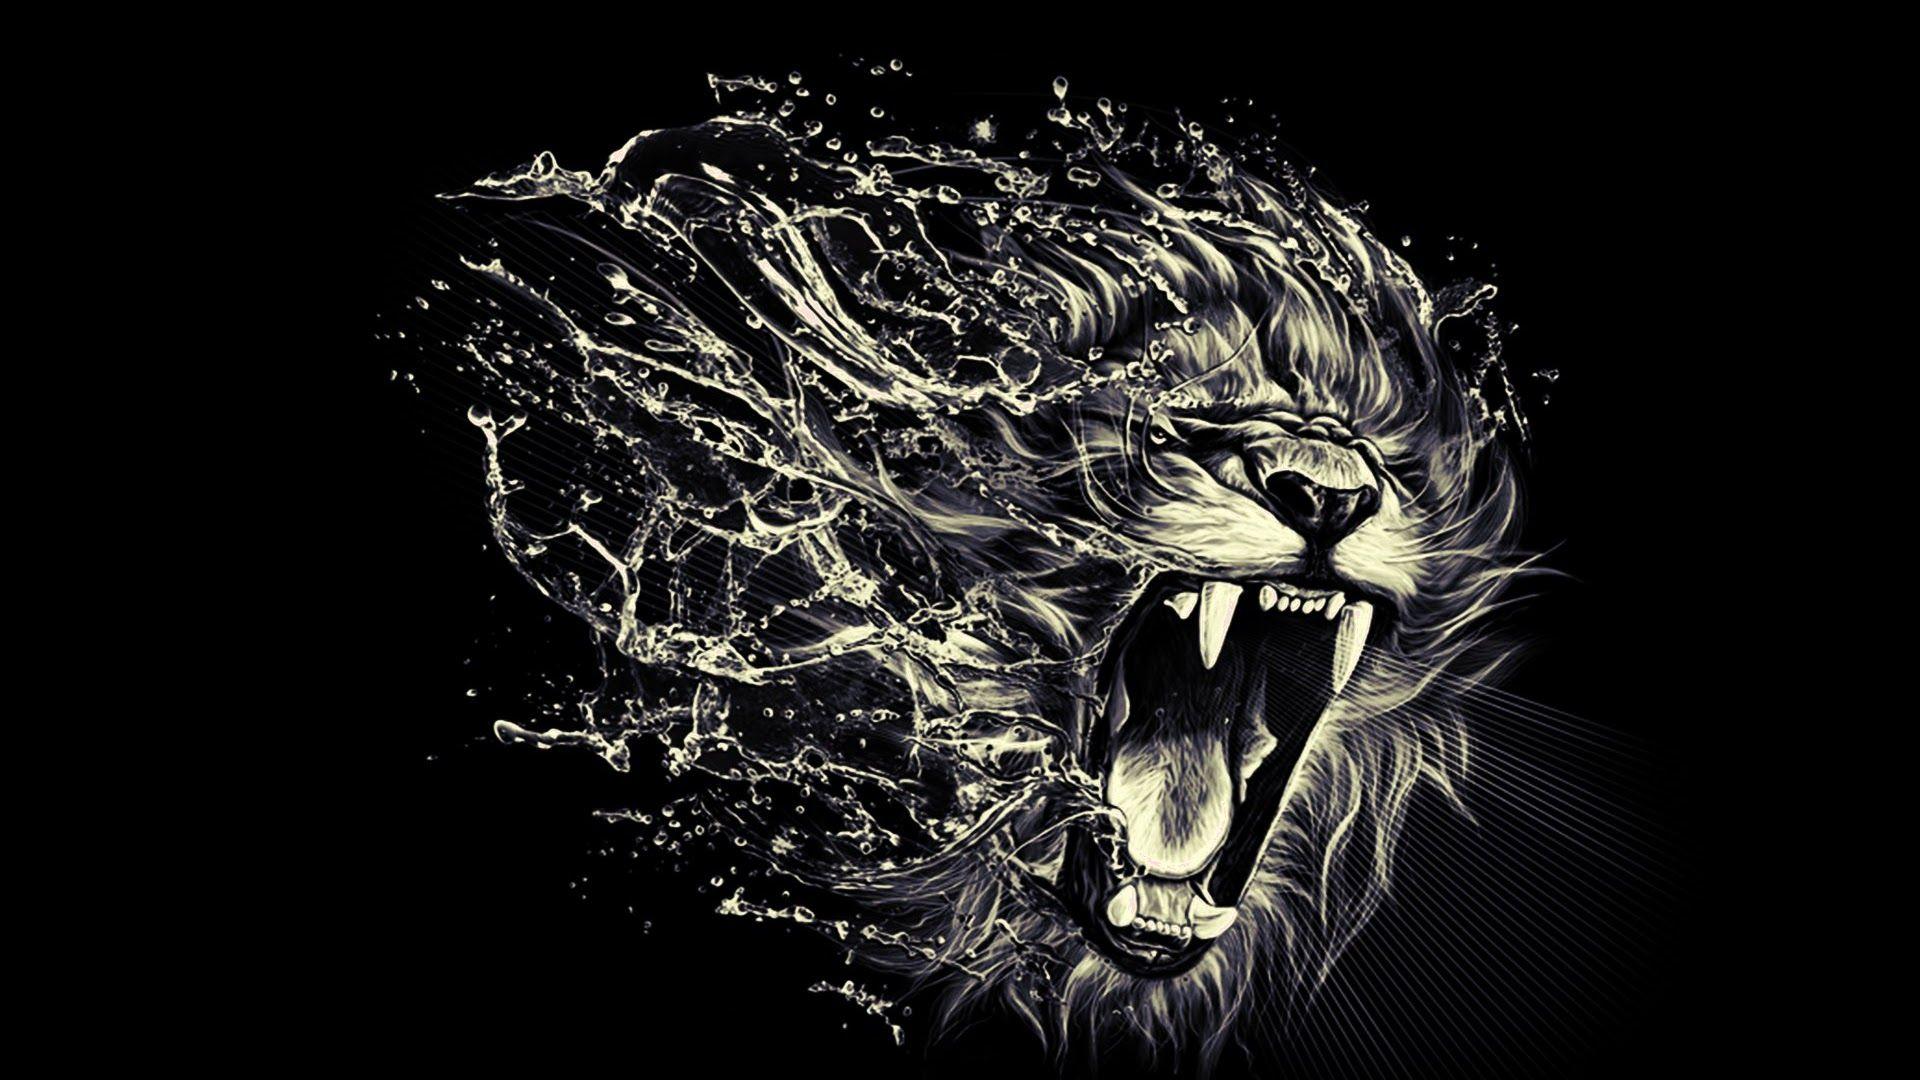 Black and white portrait of angry lion 2K wallpaper download